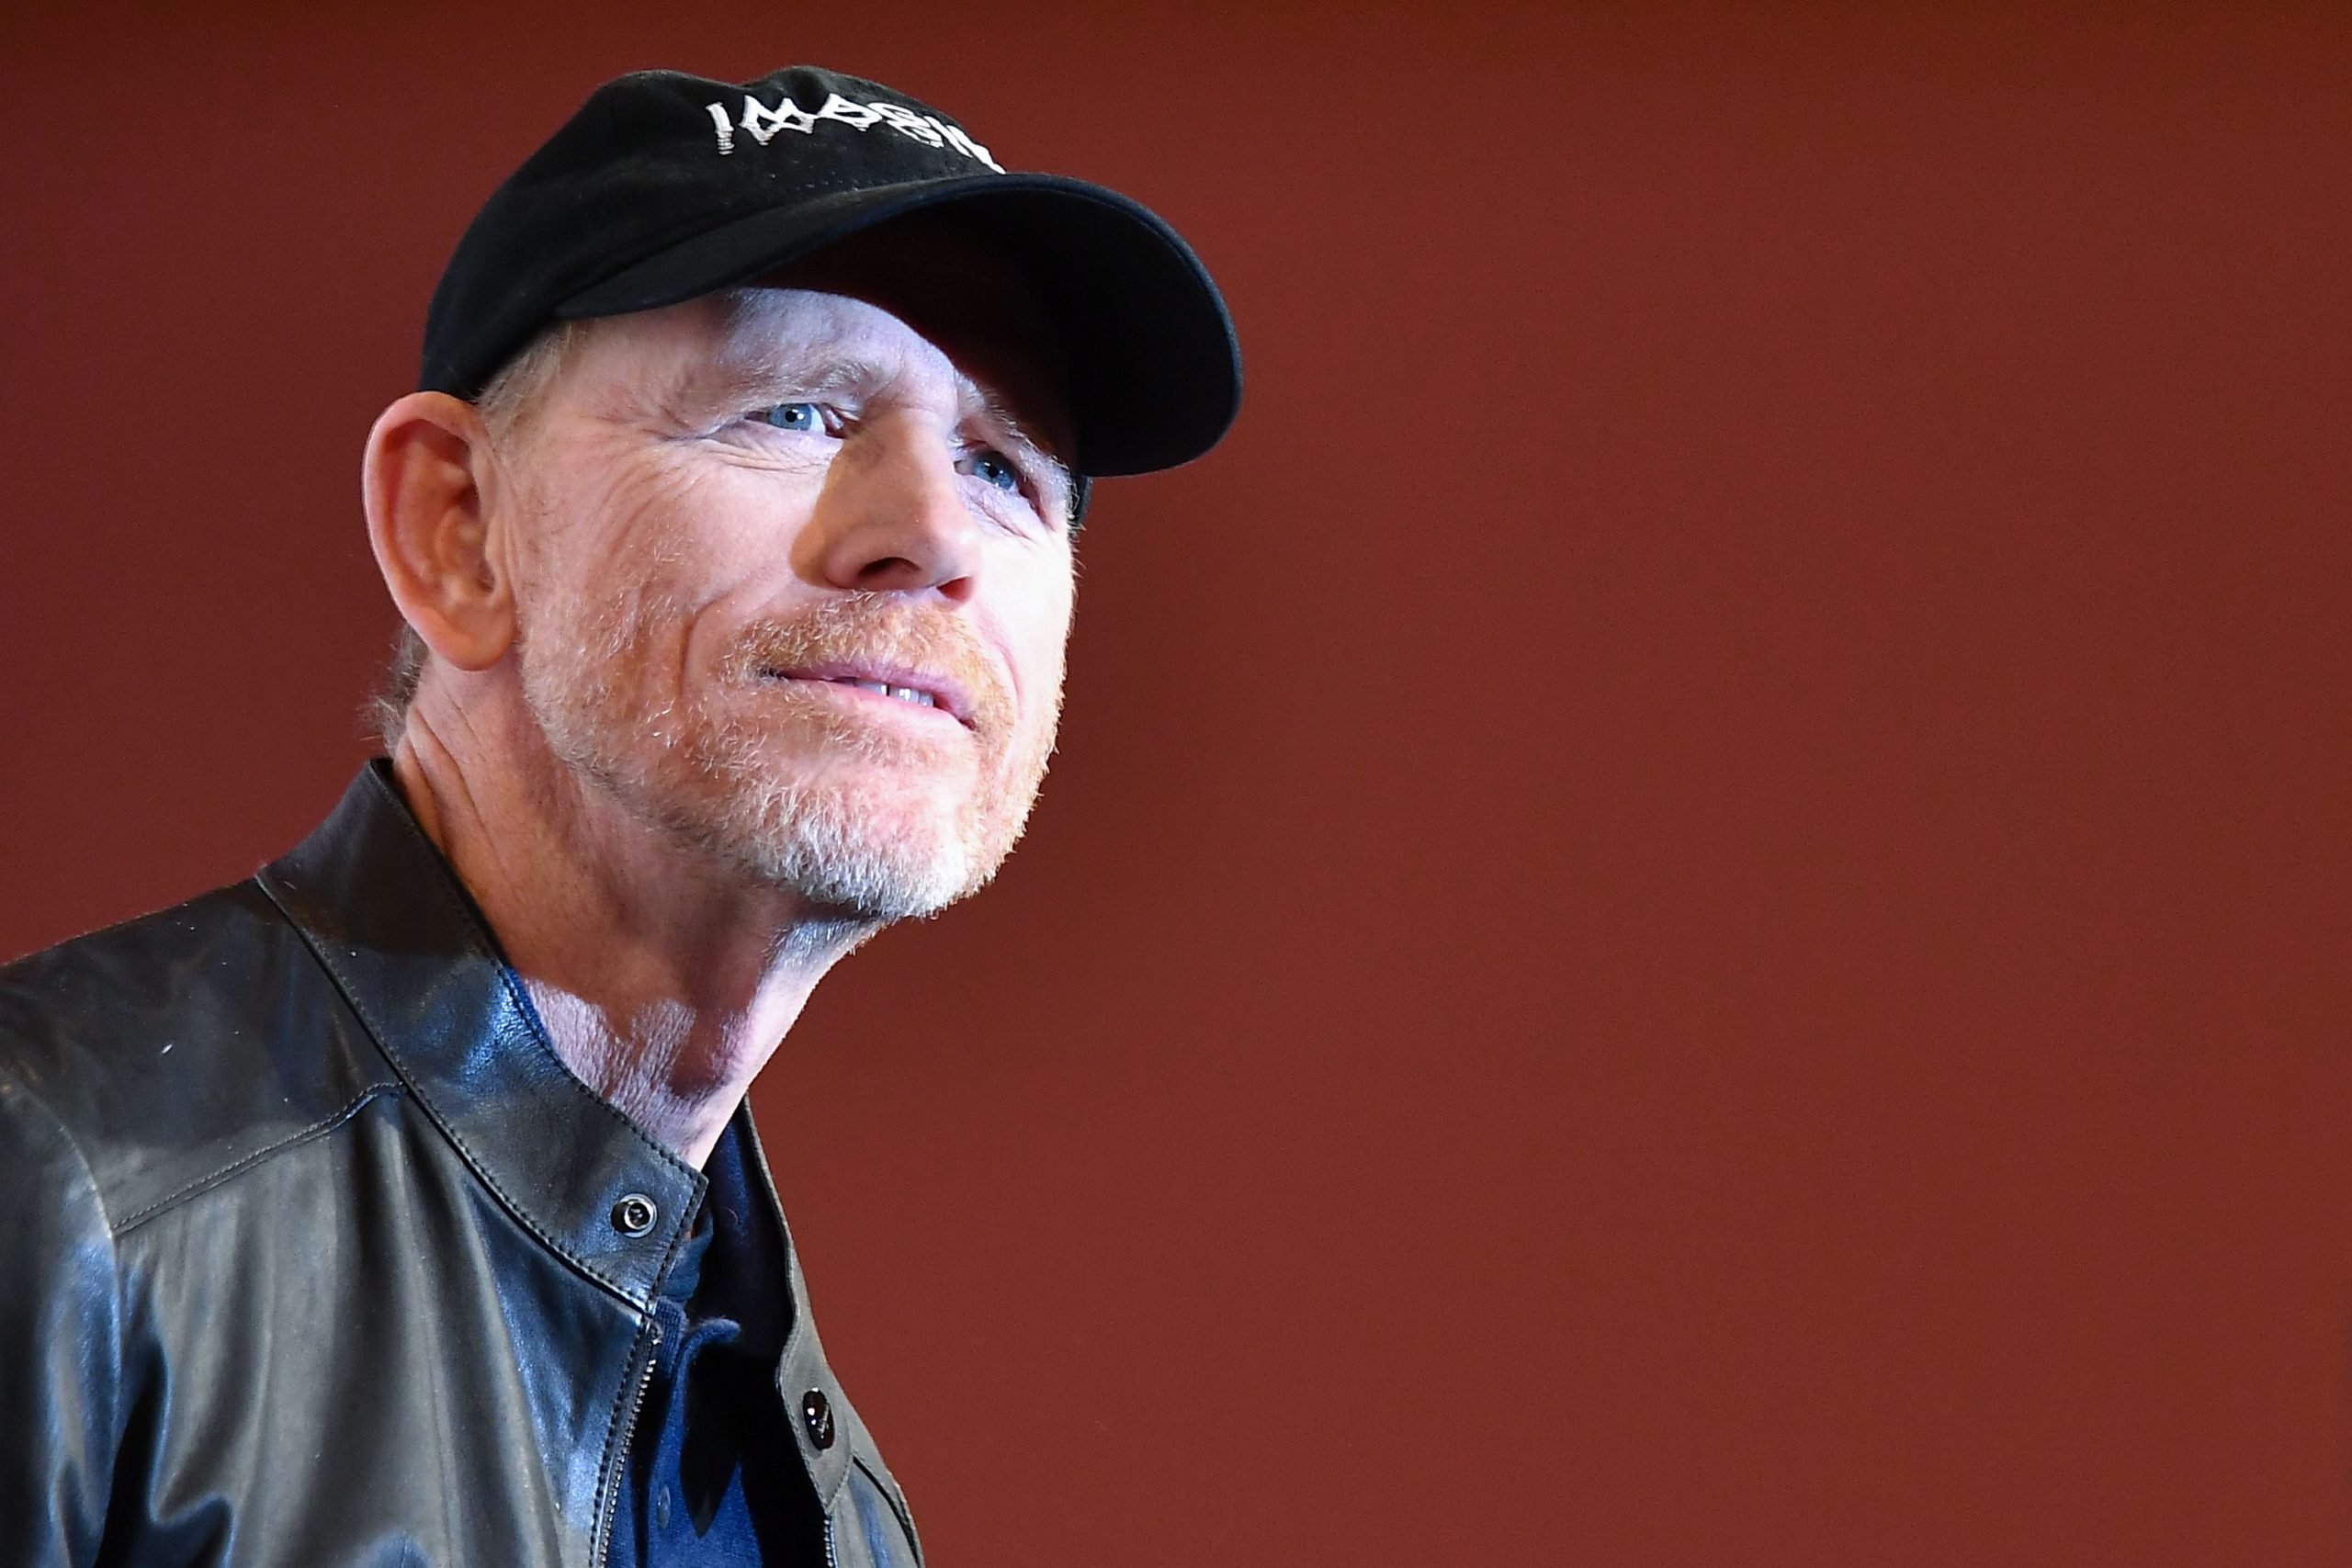 Director, producer, actor, and author Ron Howard